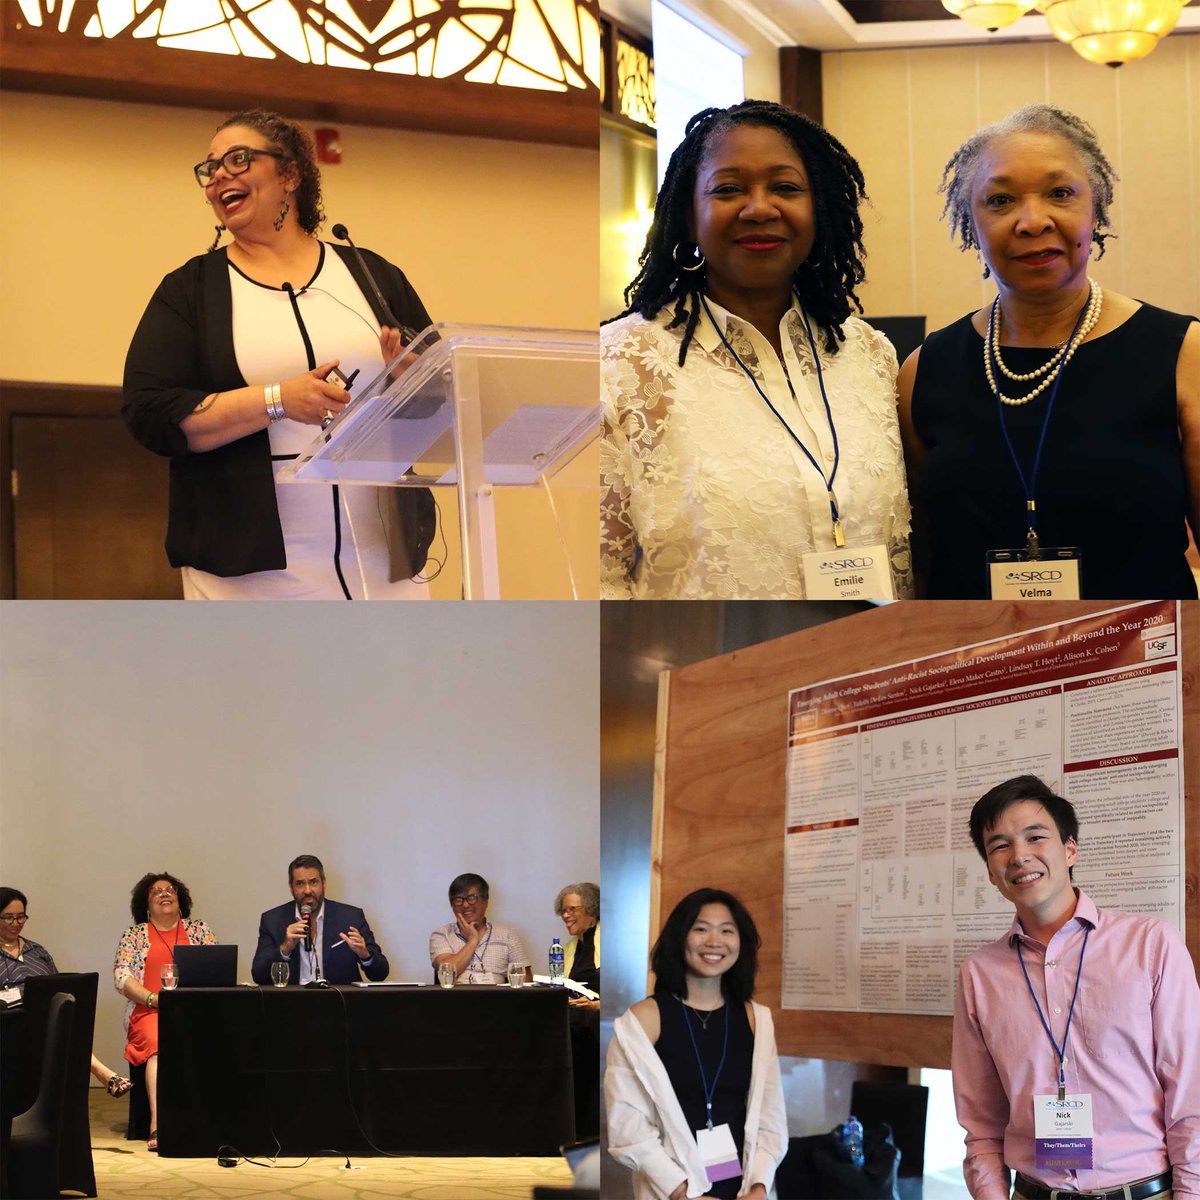 What a great first day at #SRCDAntiracistSummit! Thank you to today's speakers and presenters! Looking forward to more engaging sessions tomorrow. #SRCDSummit24 #Panama #LiveForMore